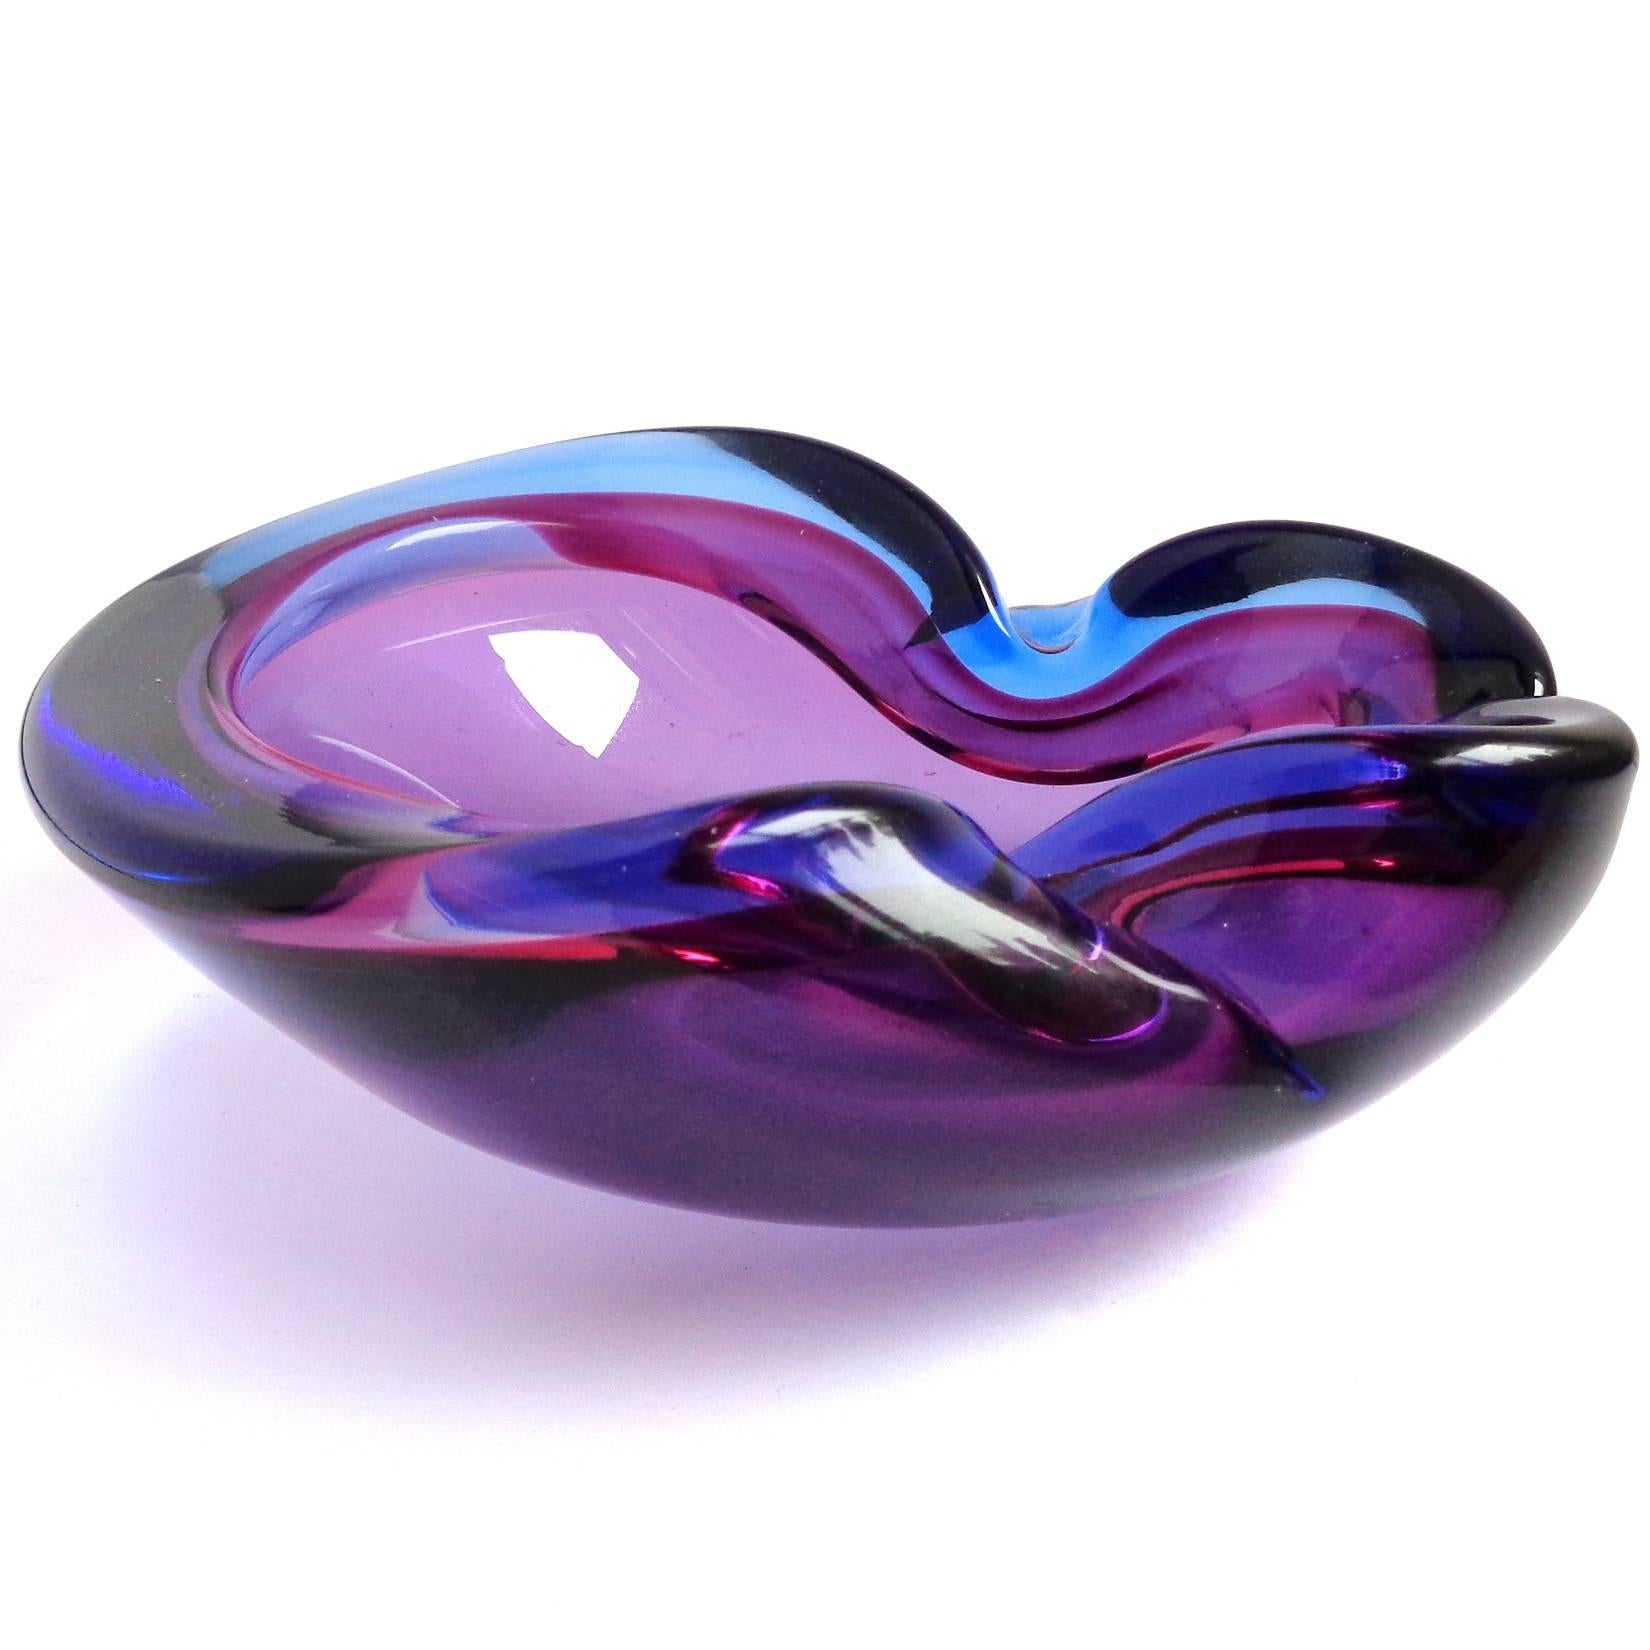 Free shipping worldwide! See details below description.

Beautiful Murano handblown Sommerso purple and blue art glass bowl. Documented to designer Alfredo Barbini. The piece has three indents along the rim and rich jewel tones. 

Please look at